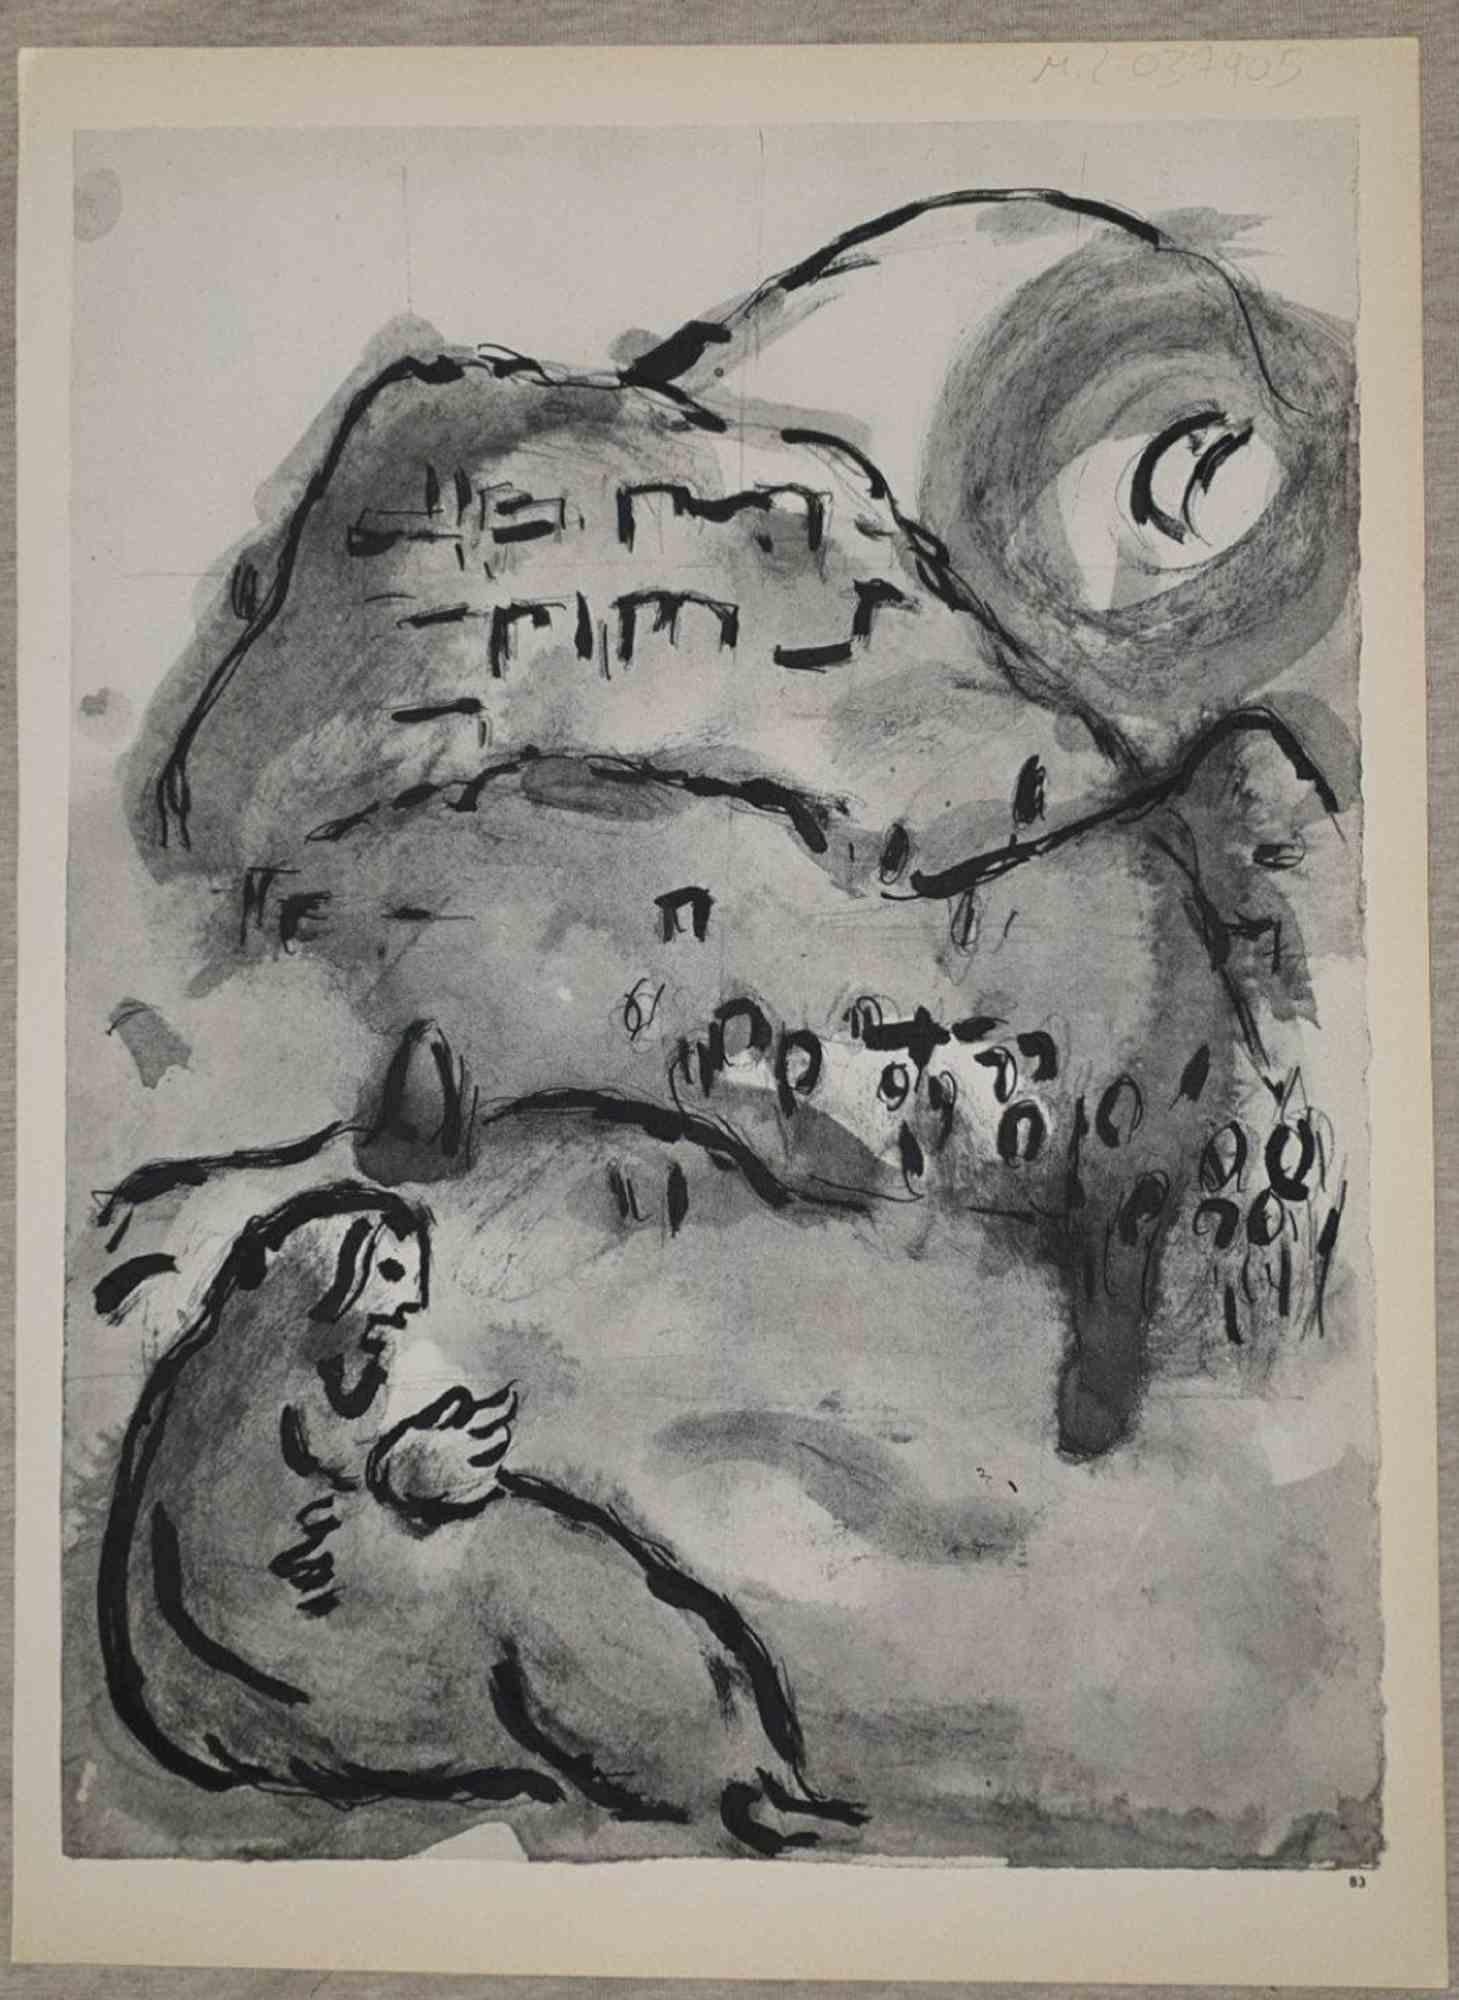  The Vision of the Prophet Obadiah  is an artwork realized by March Chagall, 1960s.

Lithograph on brown-toned paper, no signature.

Lithograph on both sides.

Edition of 6500 unsigned lithographs. Printed by Mourlot and published by Tériade,